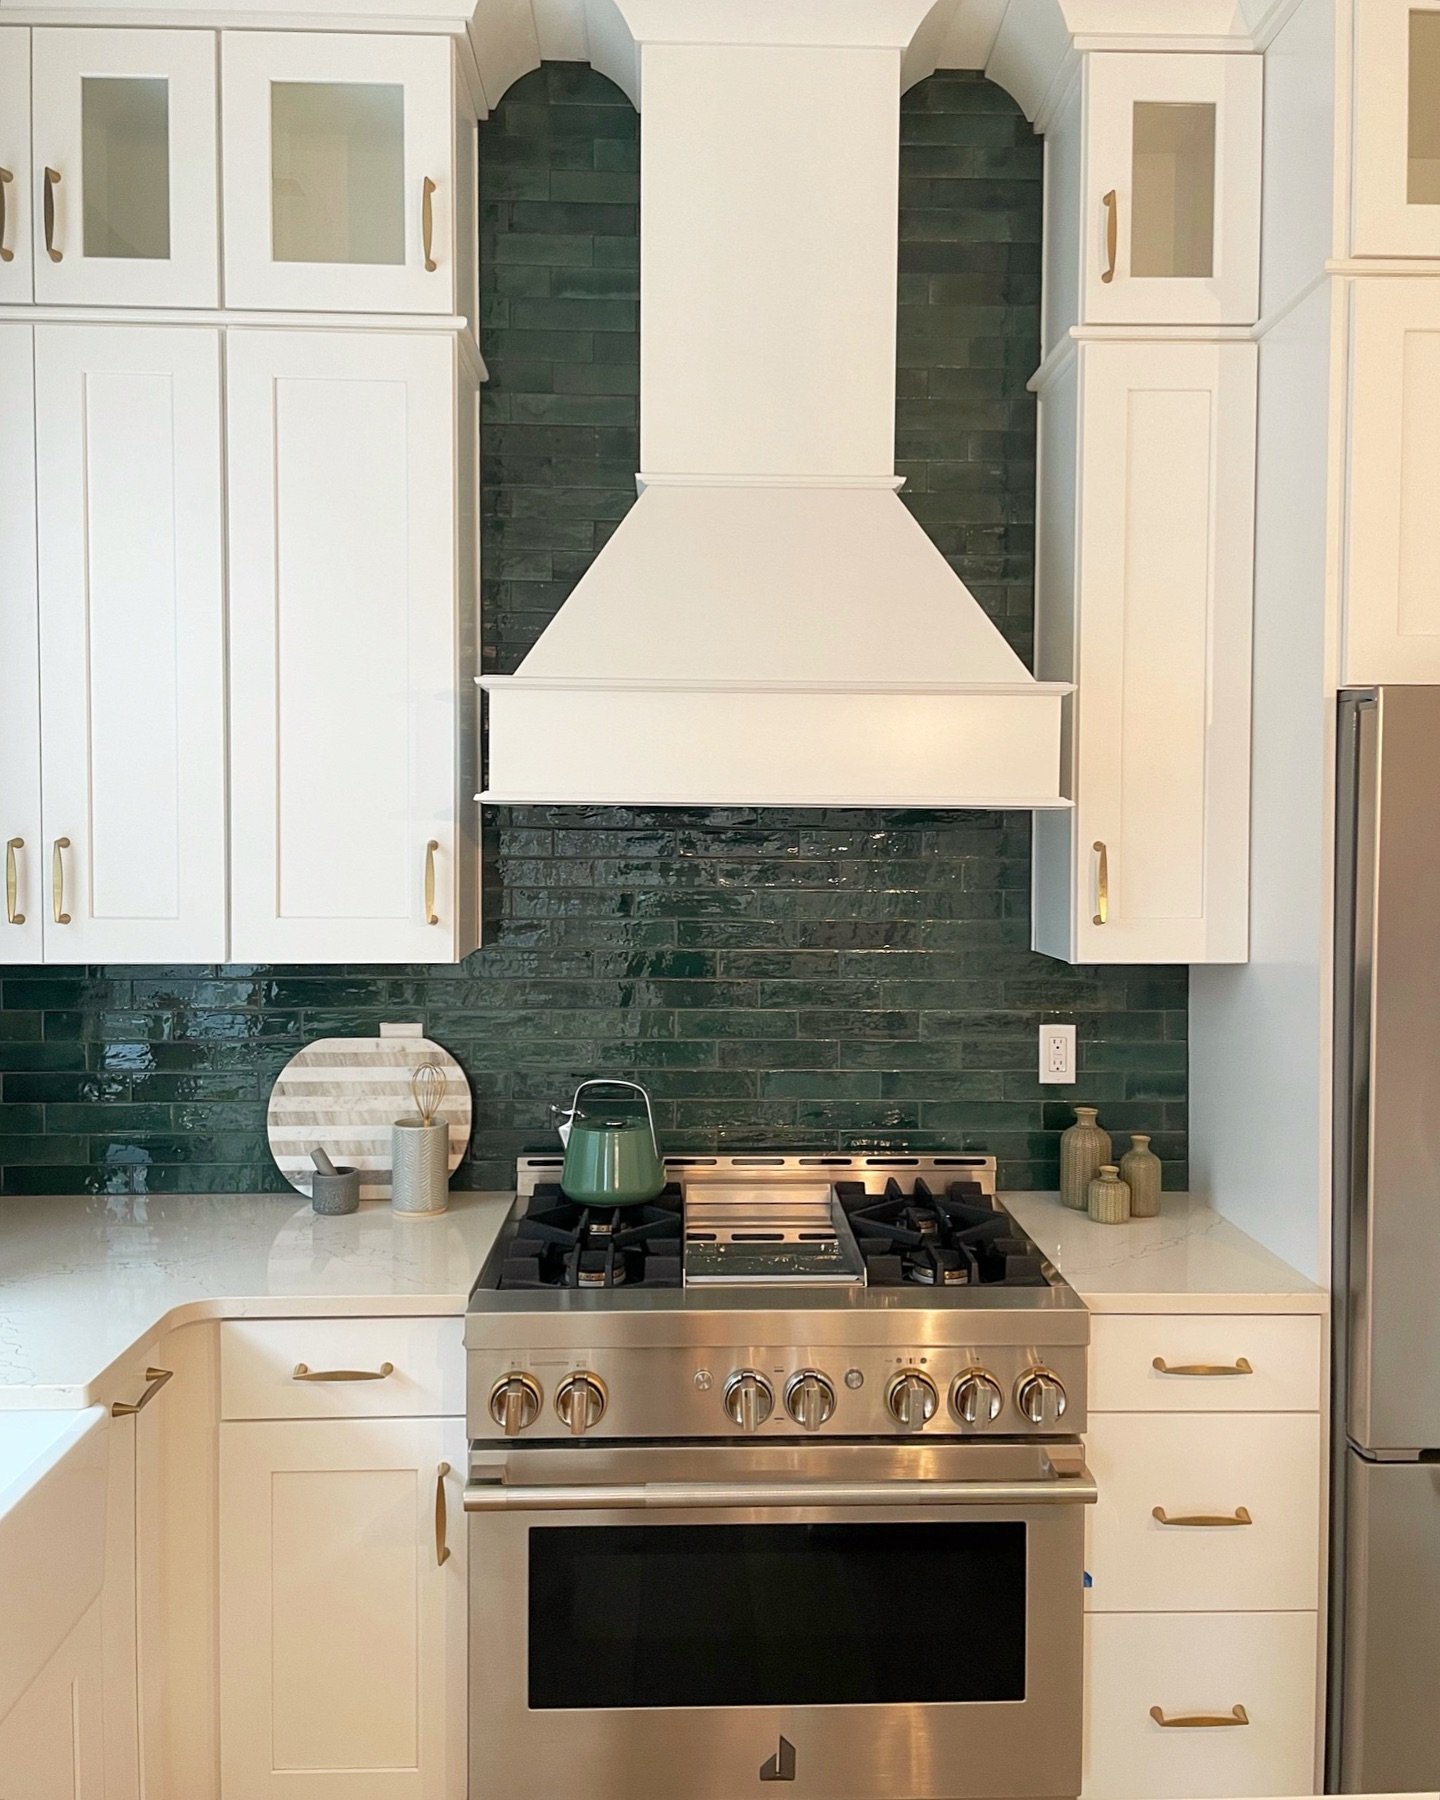 Making every moment count in this beautiful @onyxandeast townhome &mdash; loved helping a client go bold with the backsplash tile! 

#newbuild #kitchen #design #luxury #interiordesign #design #carmelin #townhome